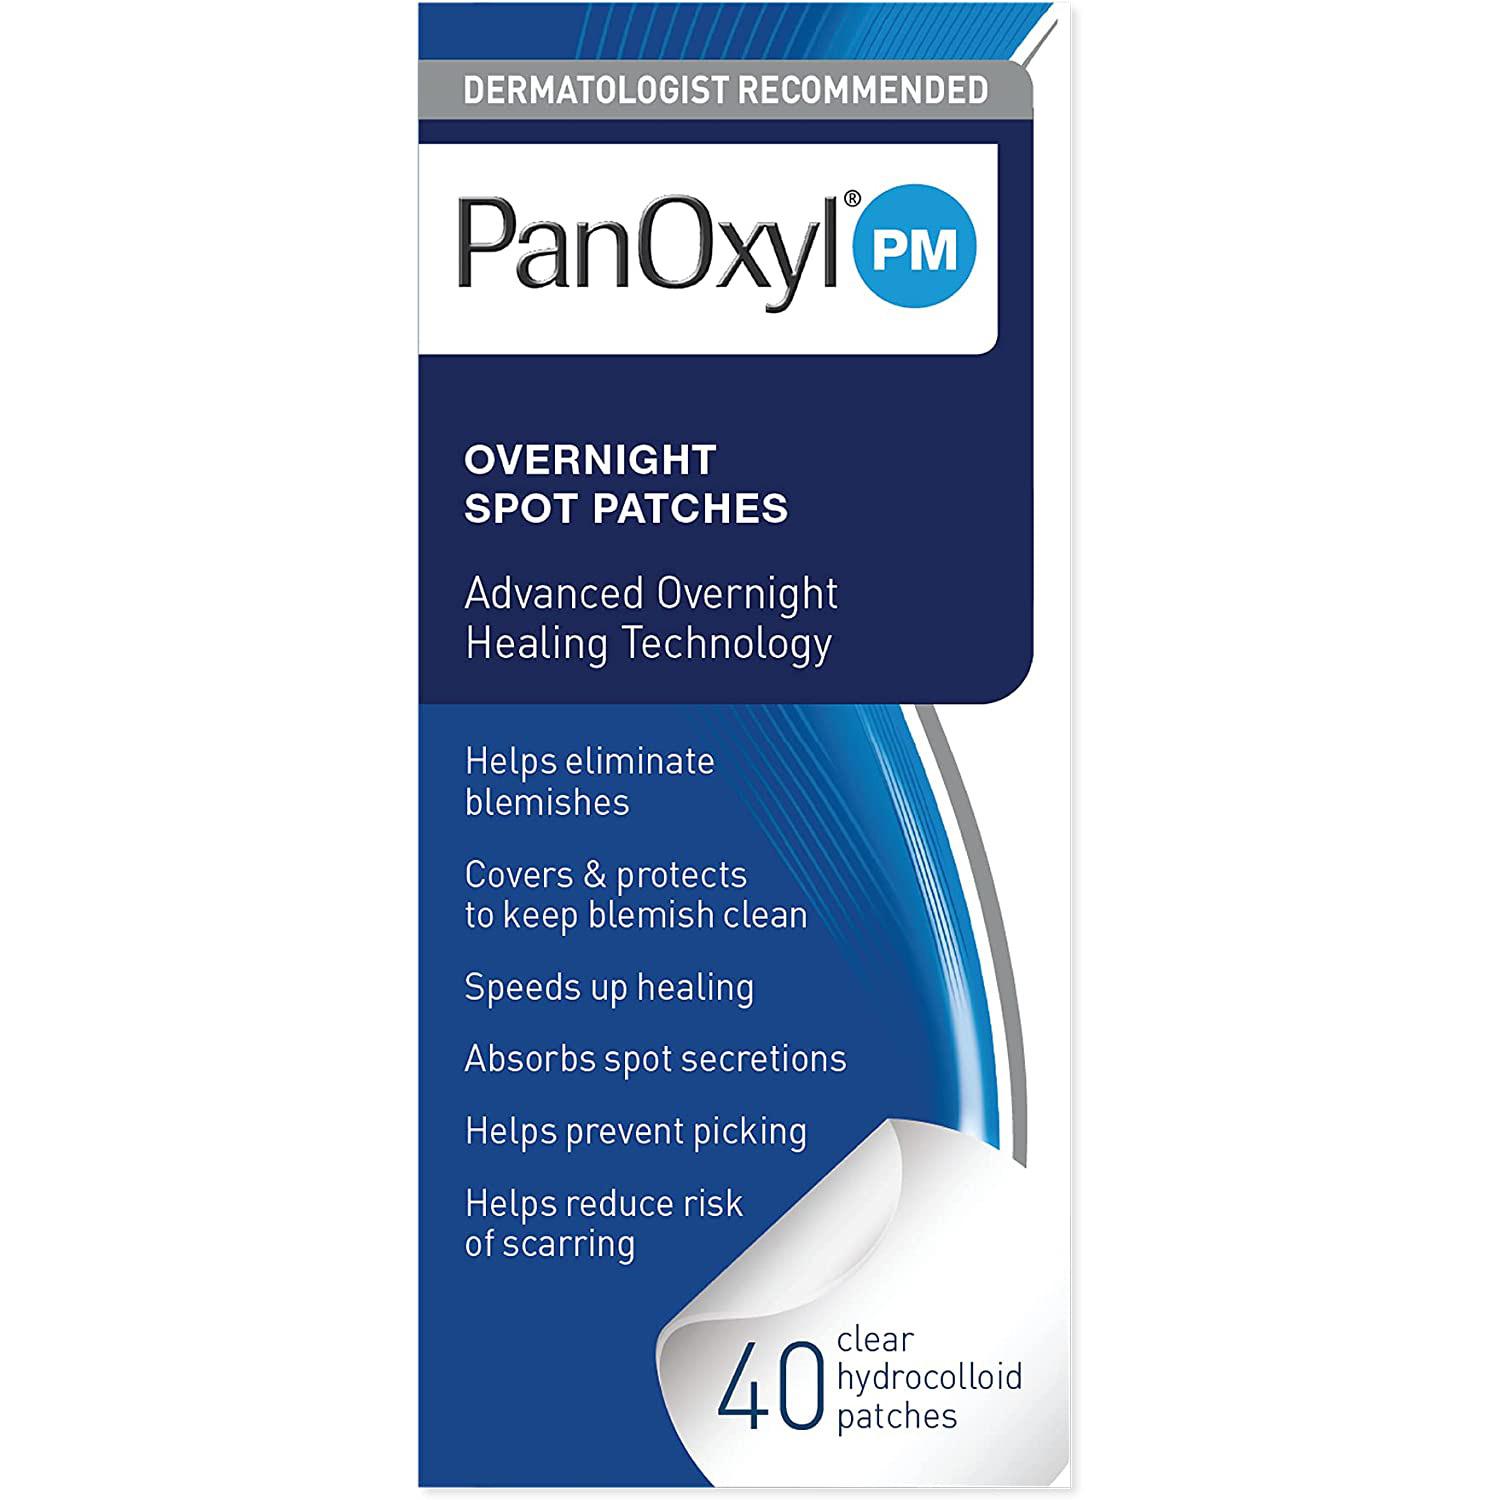 80 PanOxyl PM Overnight Spot Patches for $11.88 Shipped